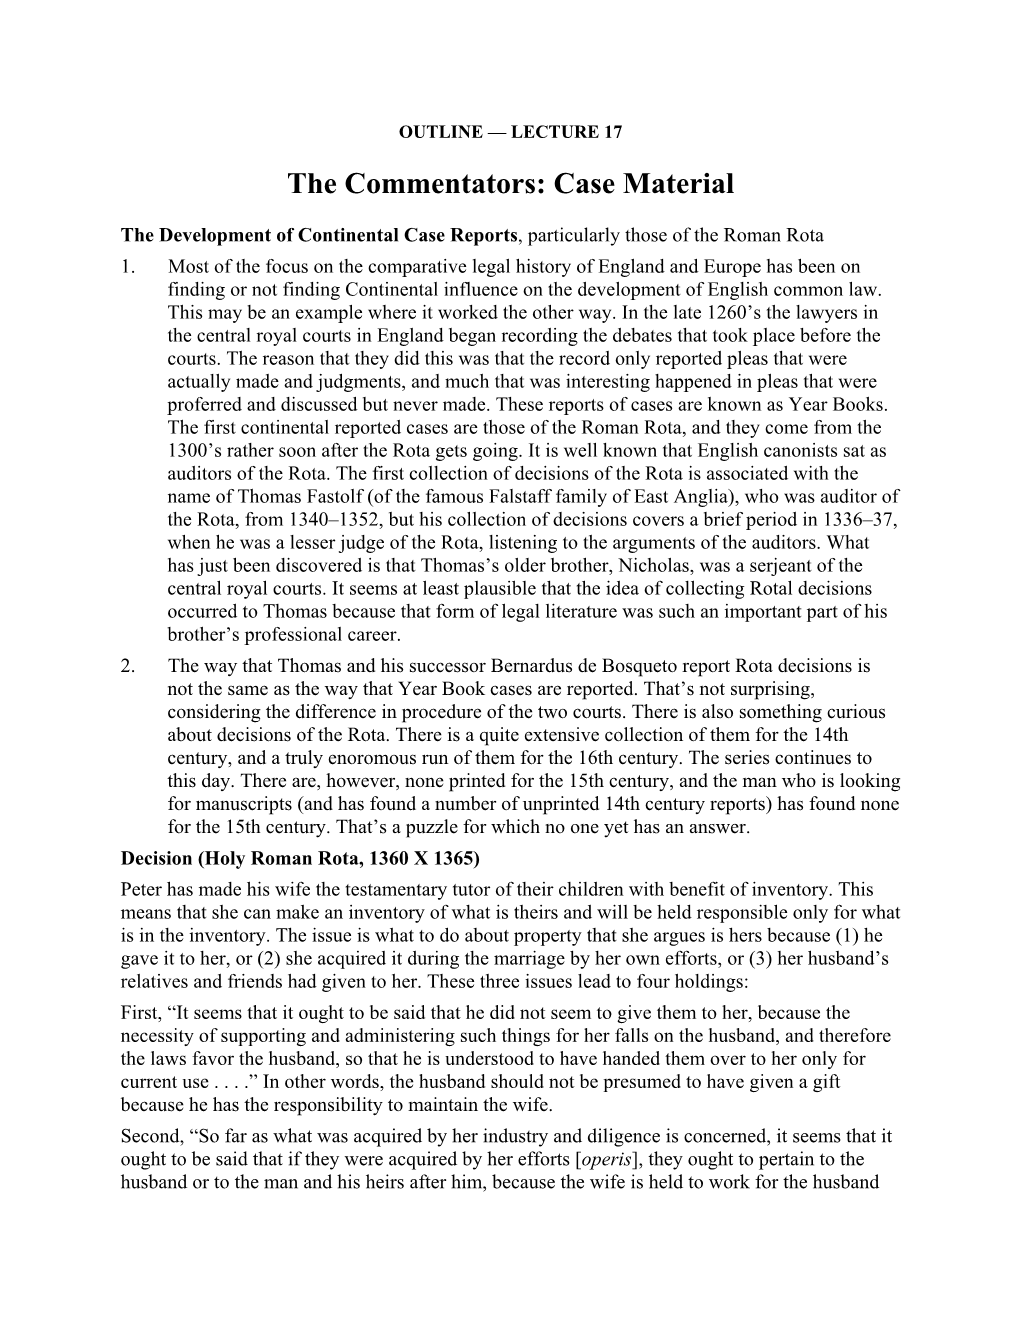 OUTLINE — LECTURE 17 the Commentators: Case Material